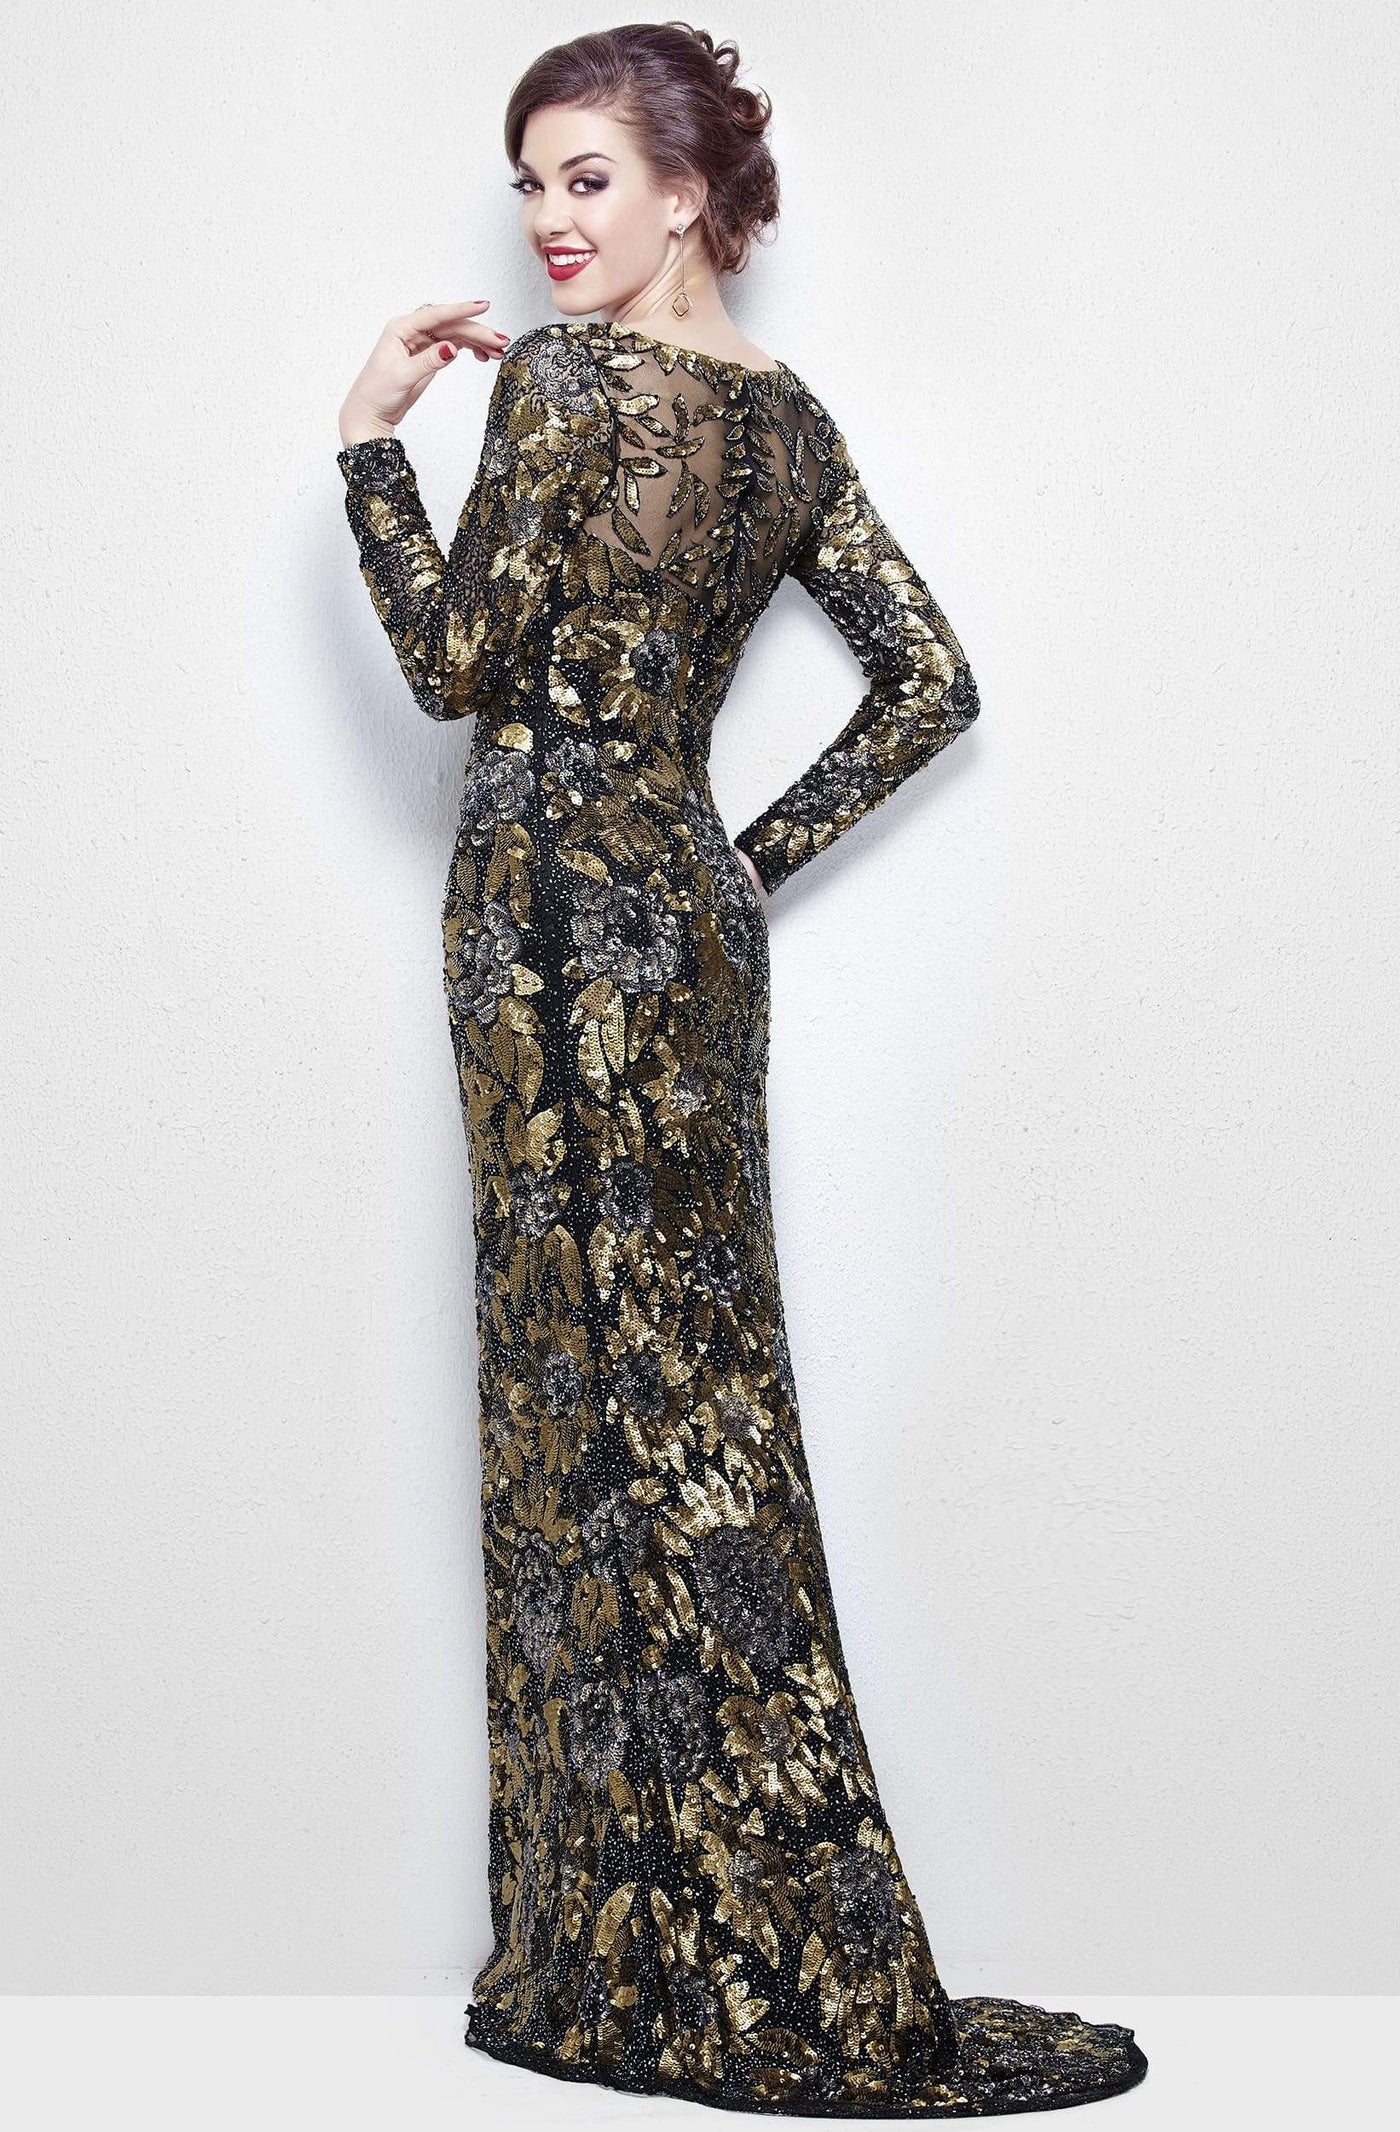 Primavera Couture - Long Sleeve Luxurious Floral Sequined Long Sheath Gown 1401 Mother of the Bride Dresses